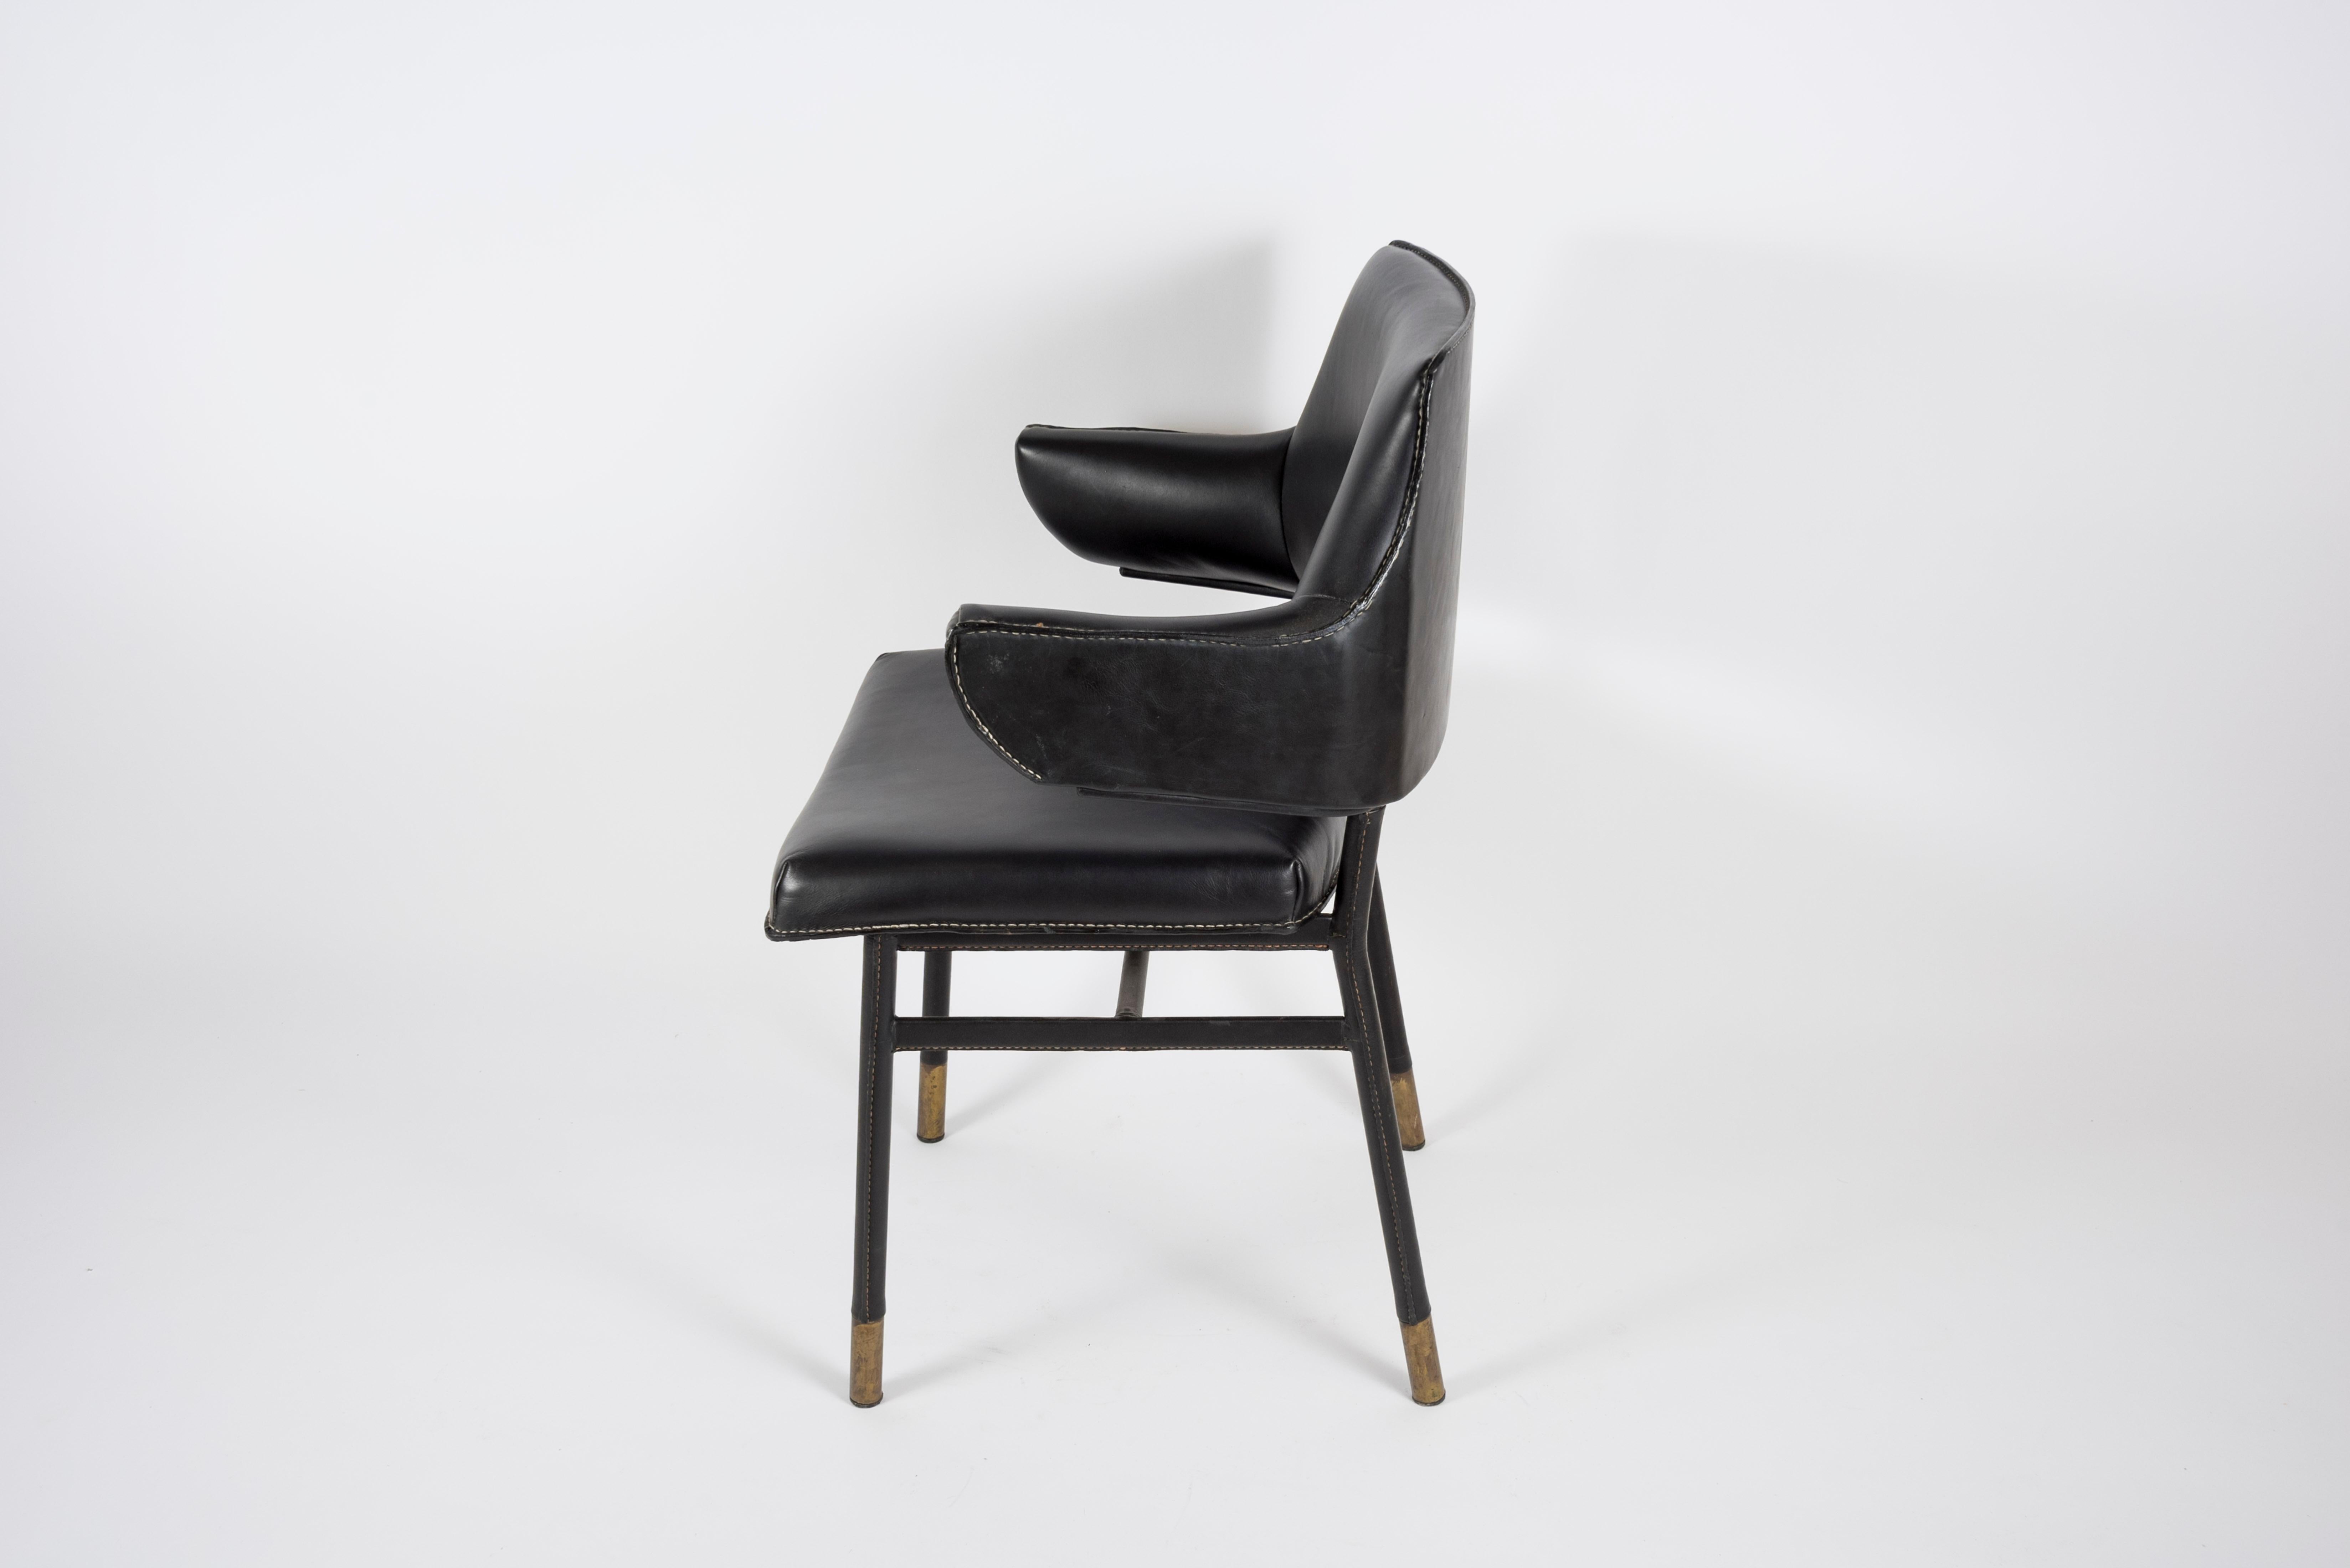 1950's stitched leather armchair by Jacques Adnet
France.